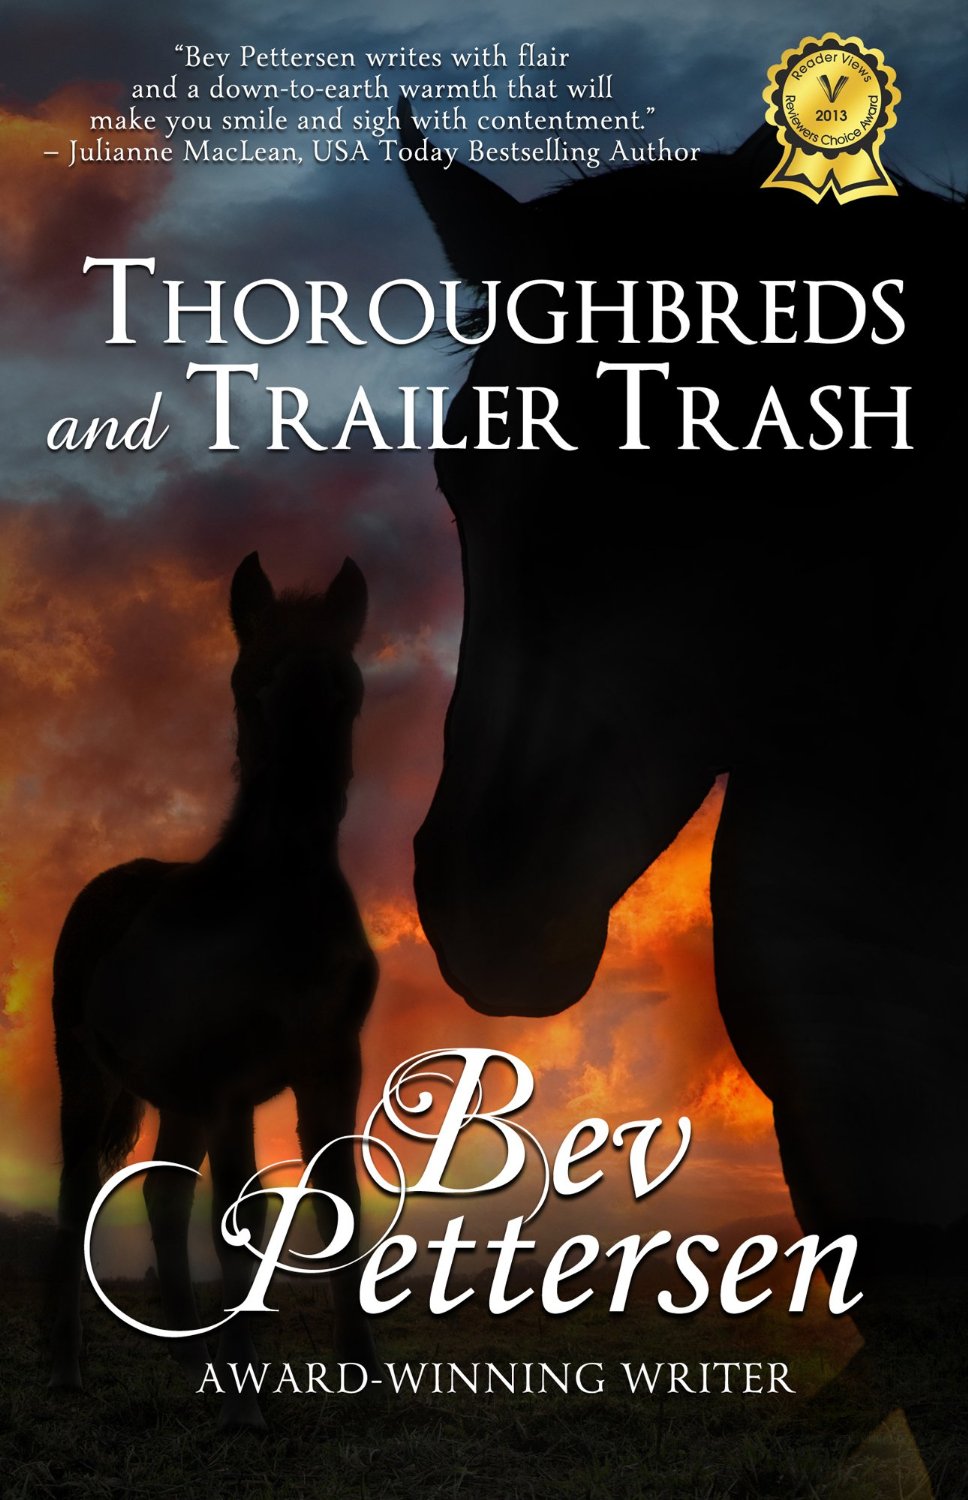 Thoroughbreds and Trailer Trash by Bev Pettersen